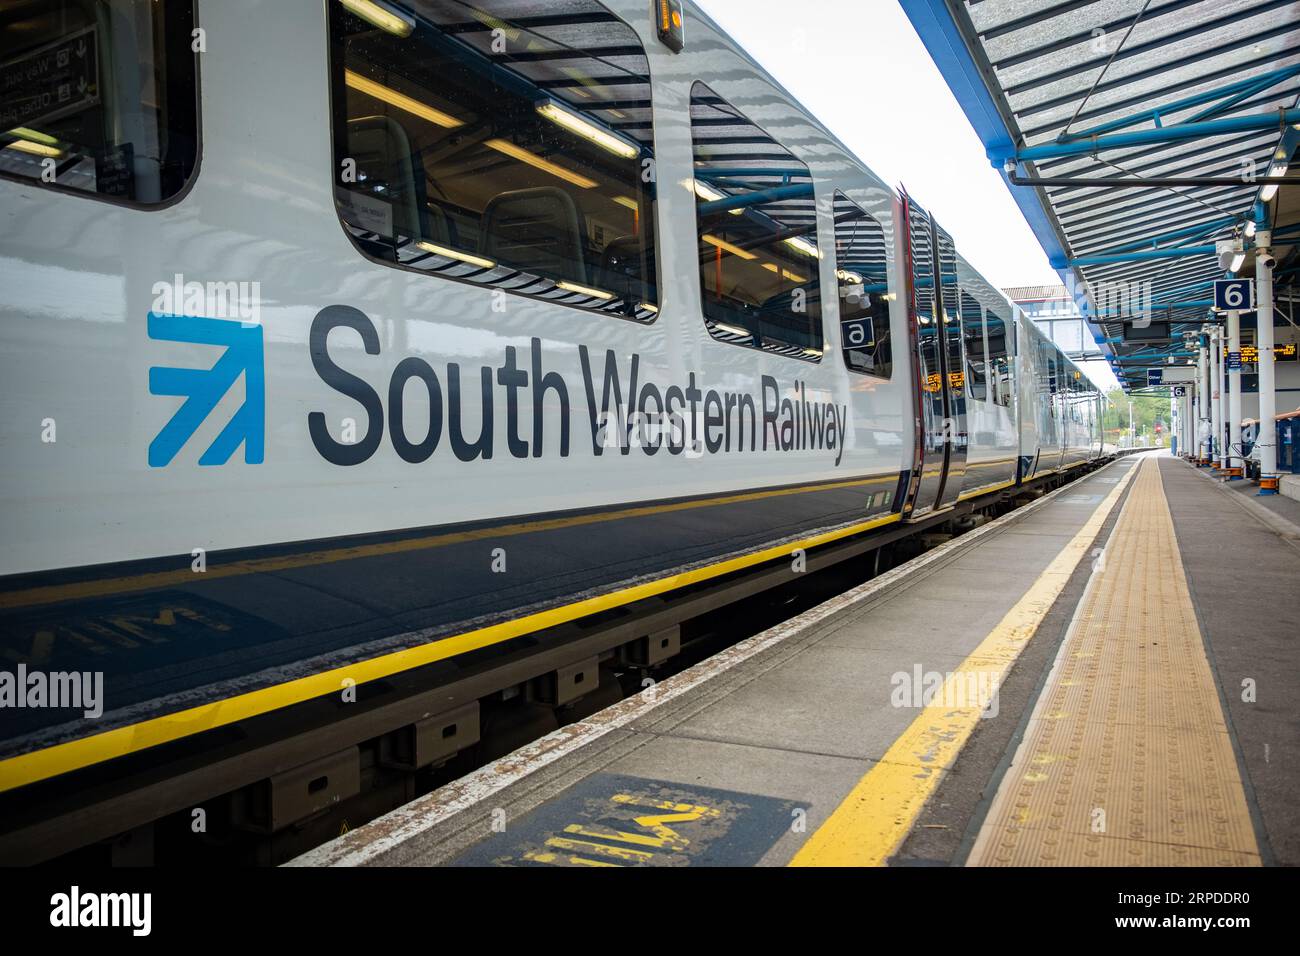 GUILDFORD, SURREY, UK- AUGUST 31, 2023: South Western Railway train on platform at Guildford Station- Surrey train station on the Portsmouth Direct Li Stock Photo